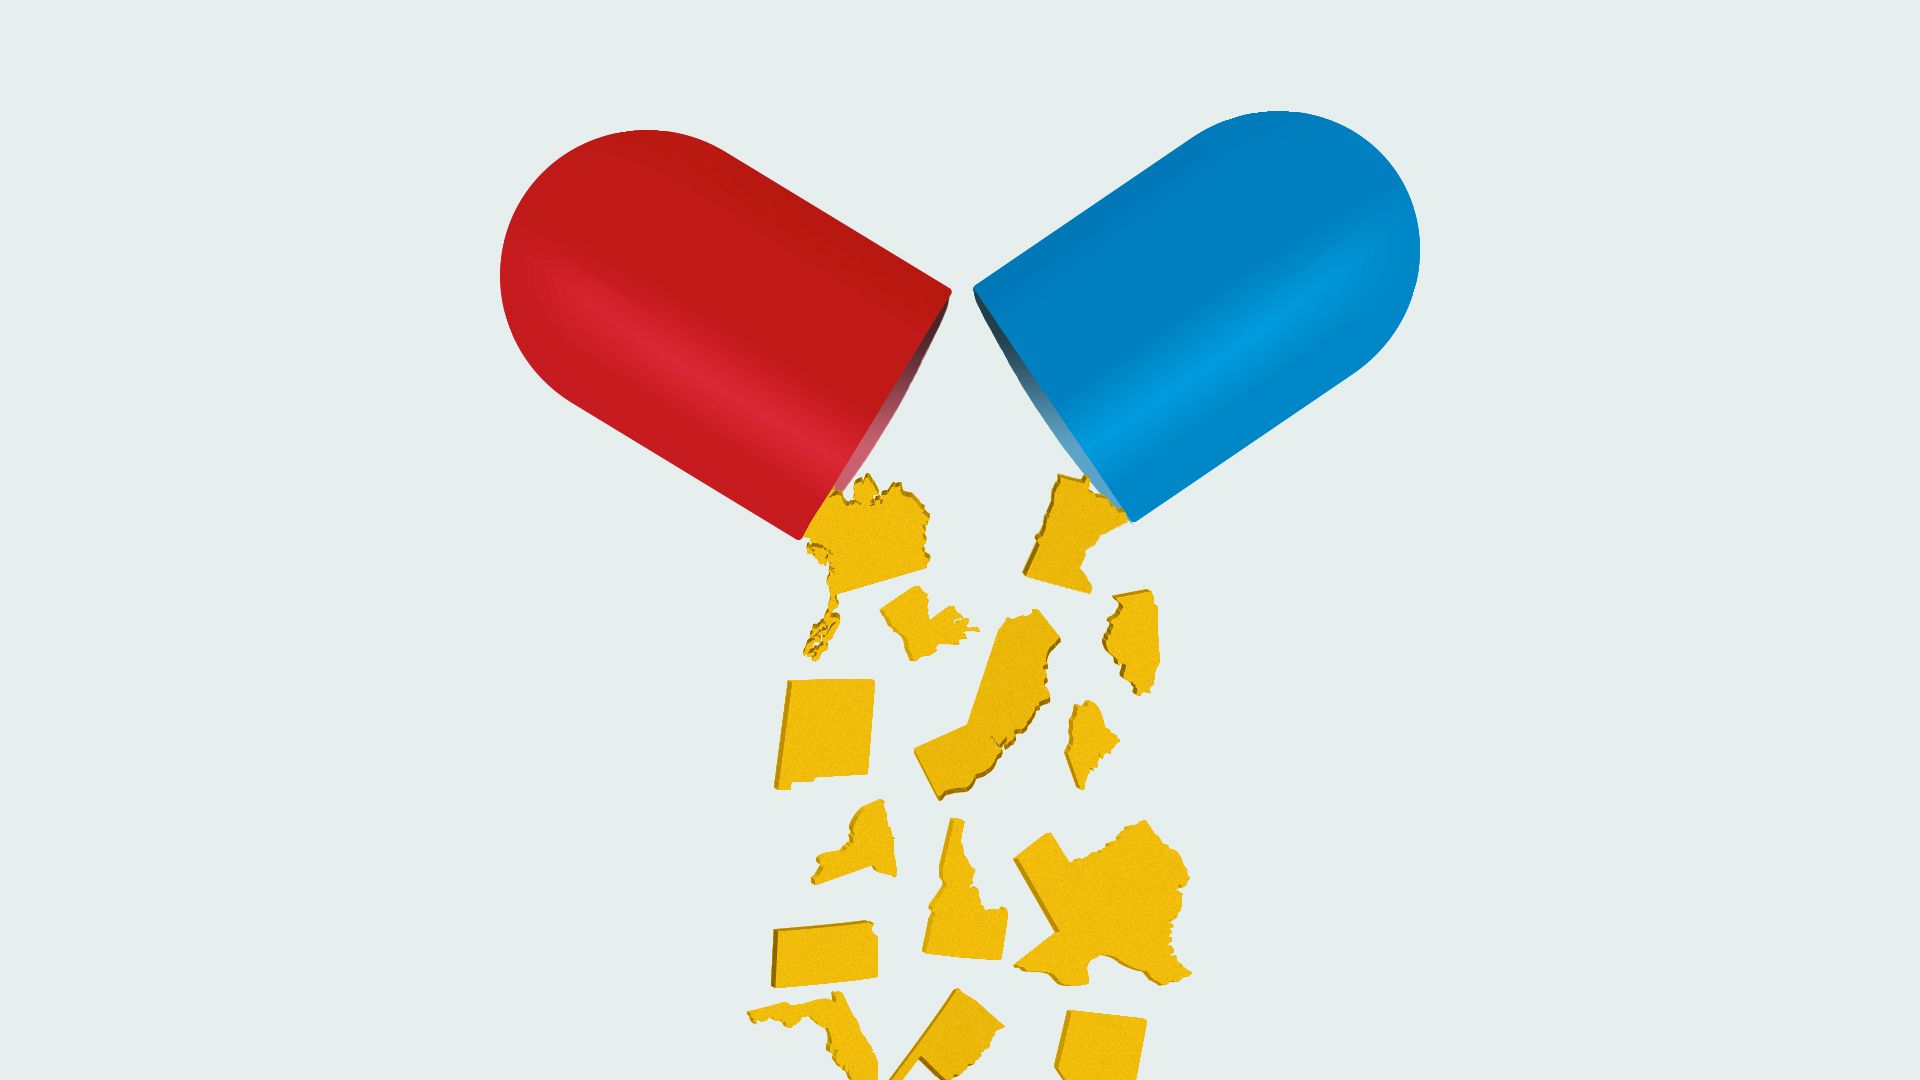 Illustration of a pills capsule opening with state-shaped pills falling out